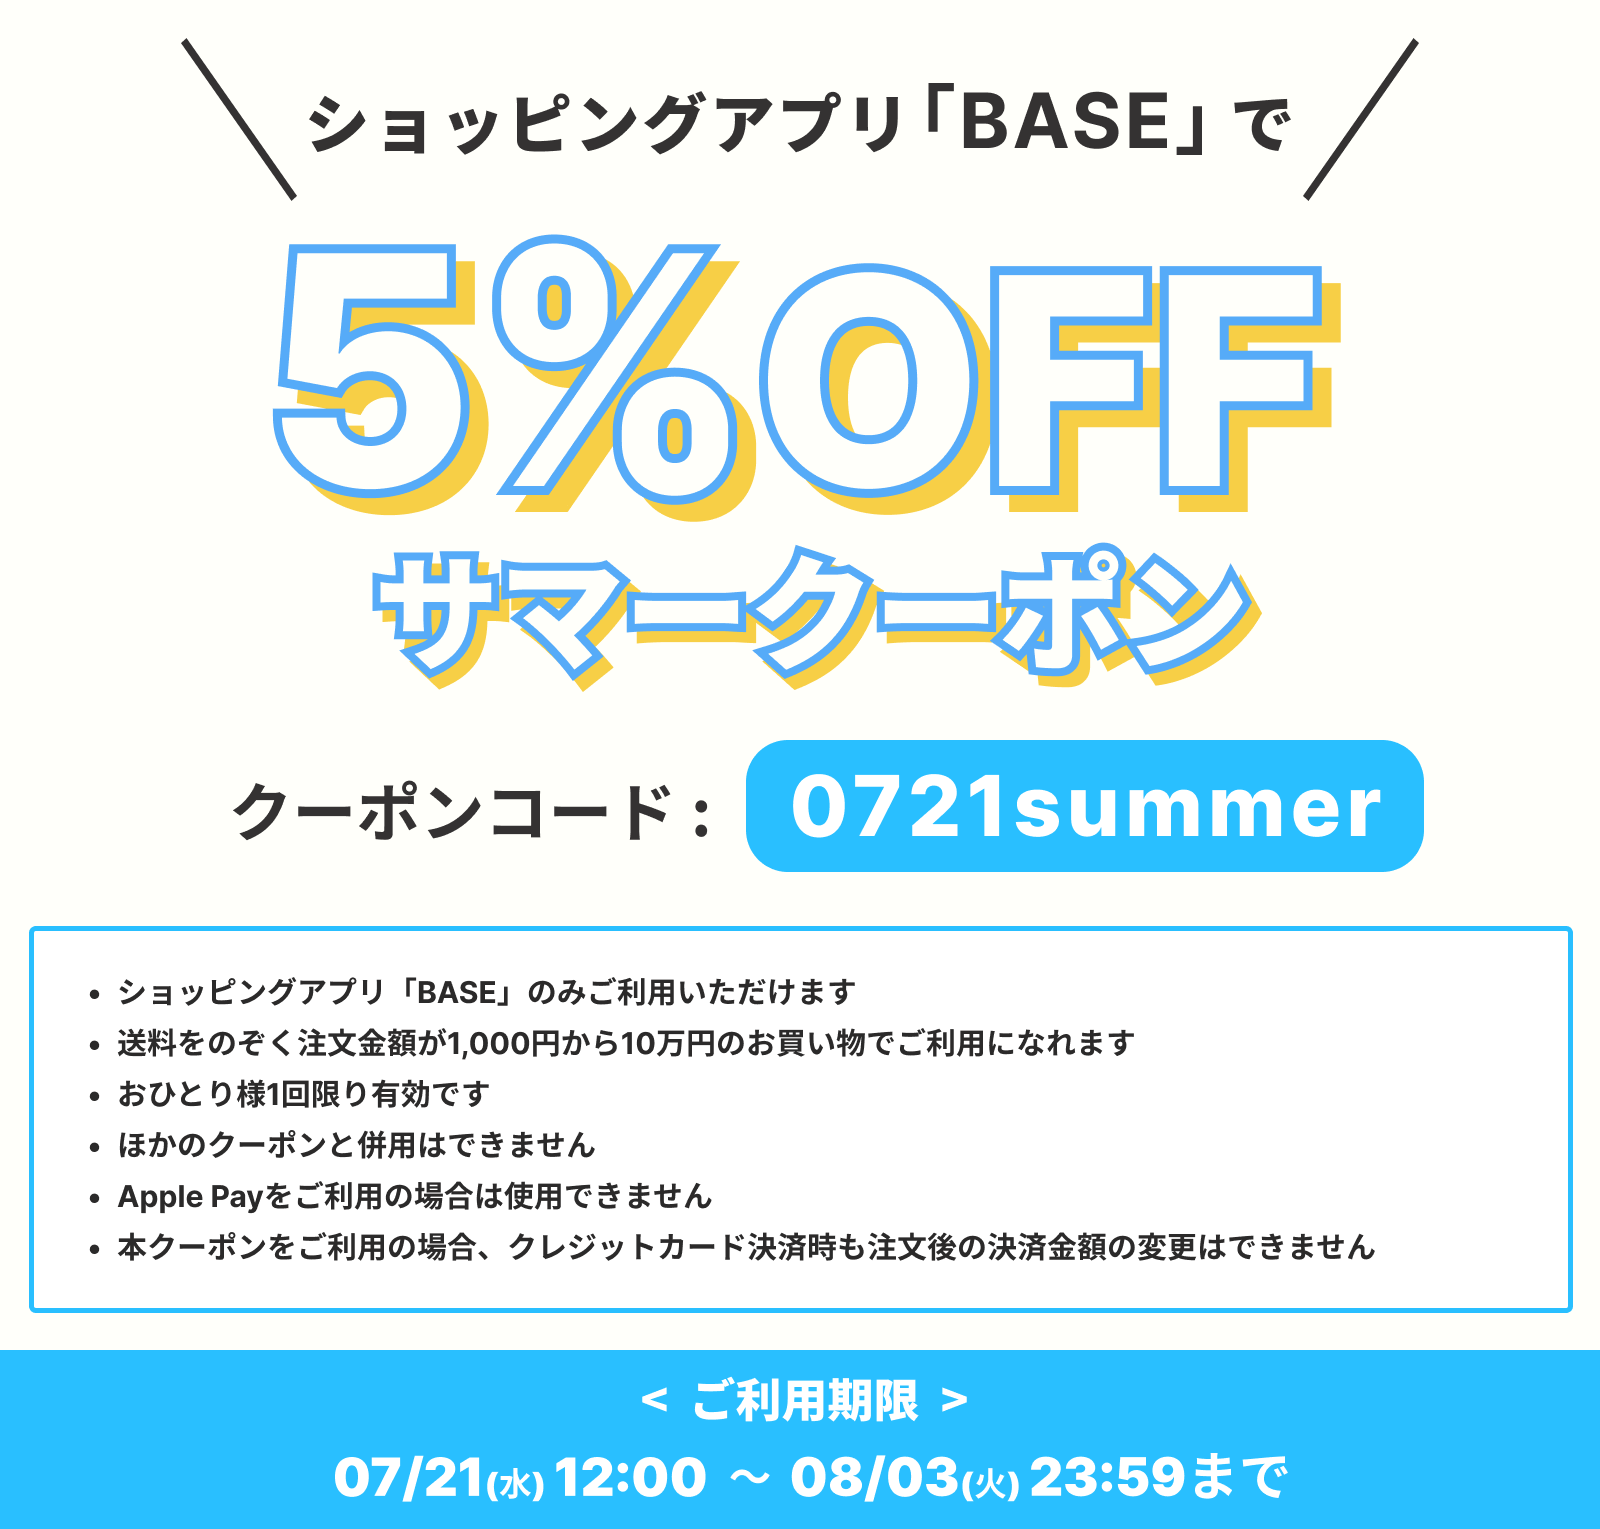 【BASE 限定】 5%off クーポンプレゼント